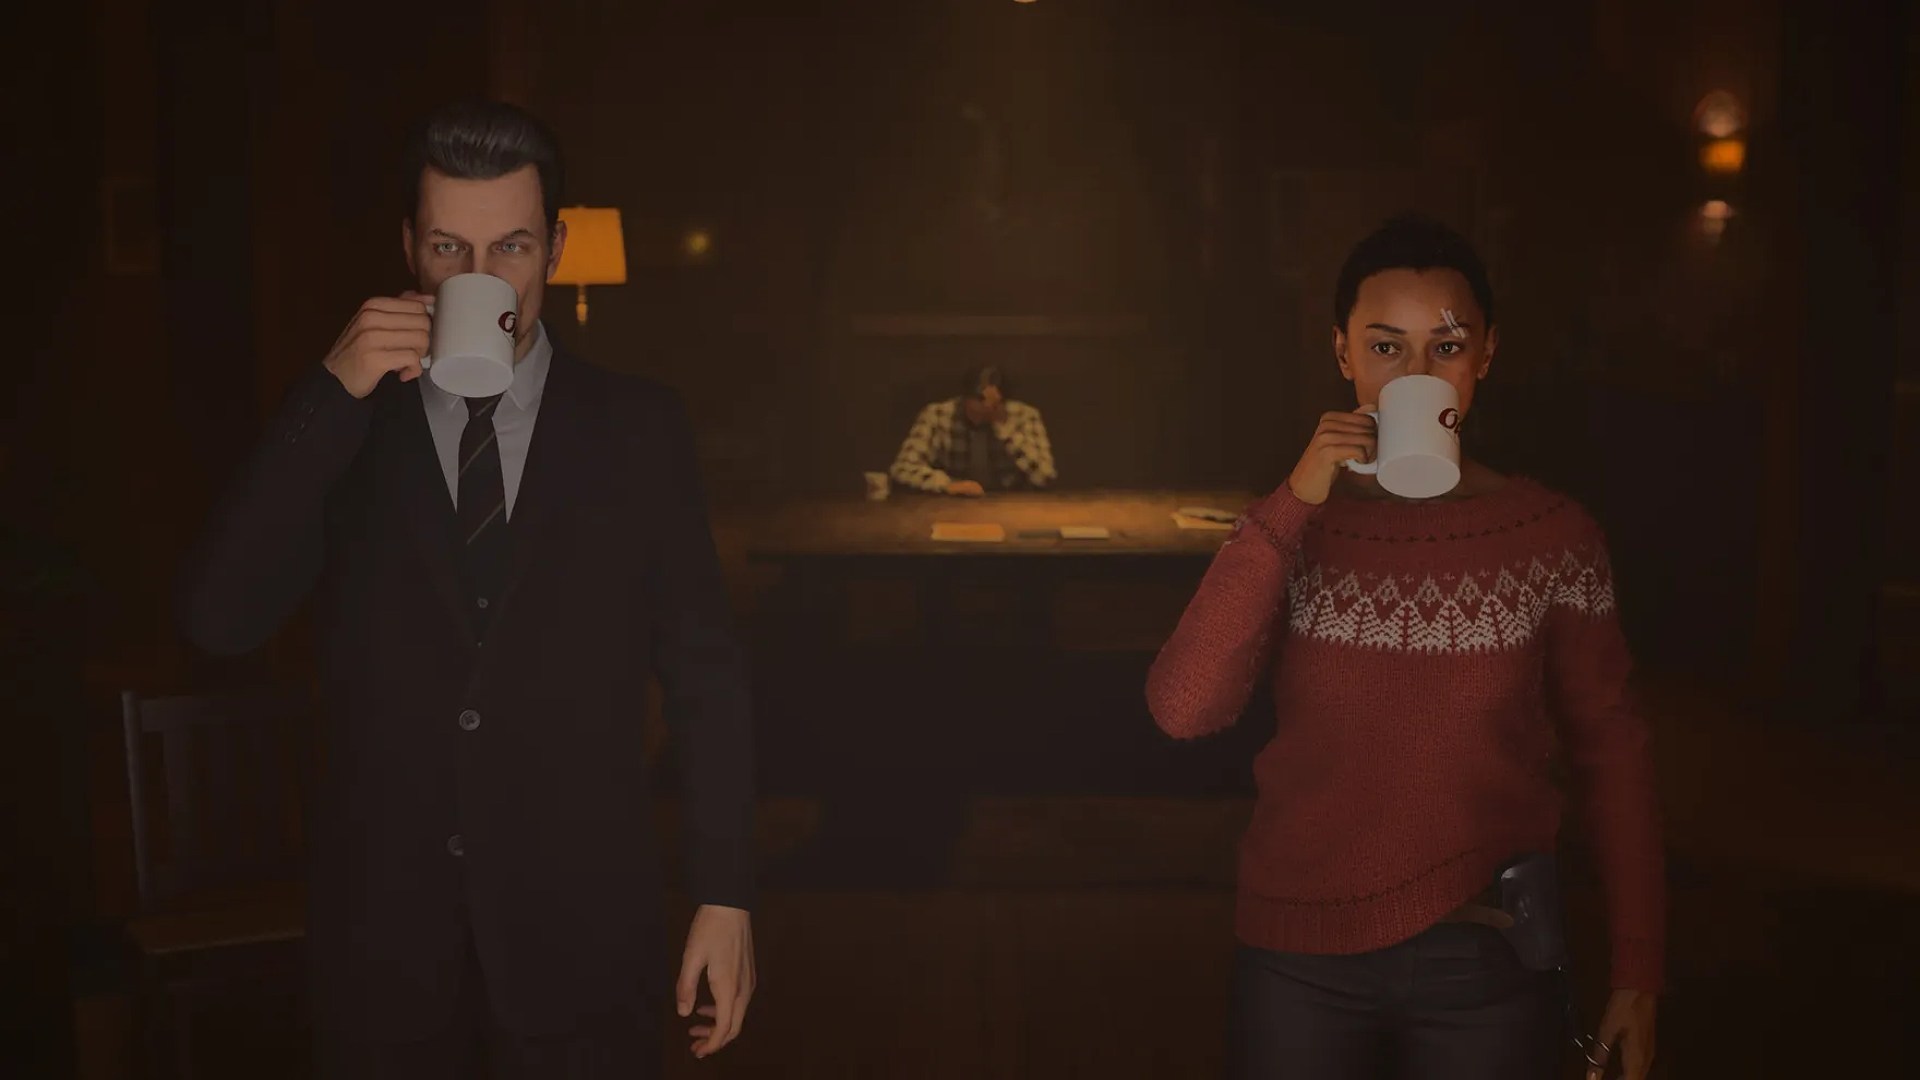 Saga and a detective sipping coffee in Alan Wake 2